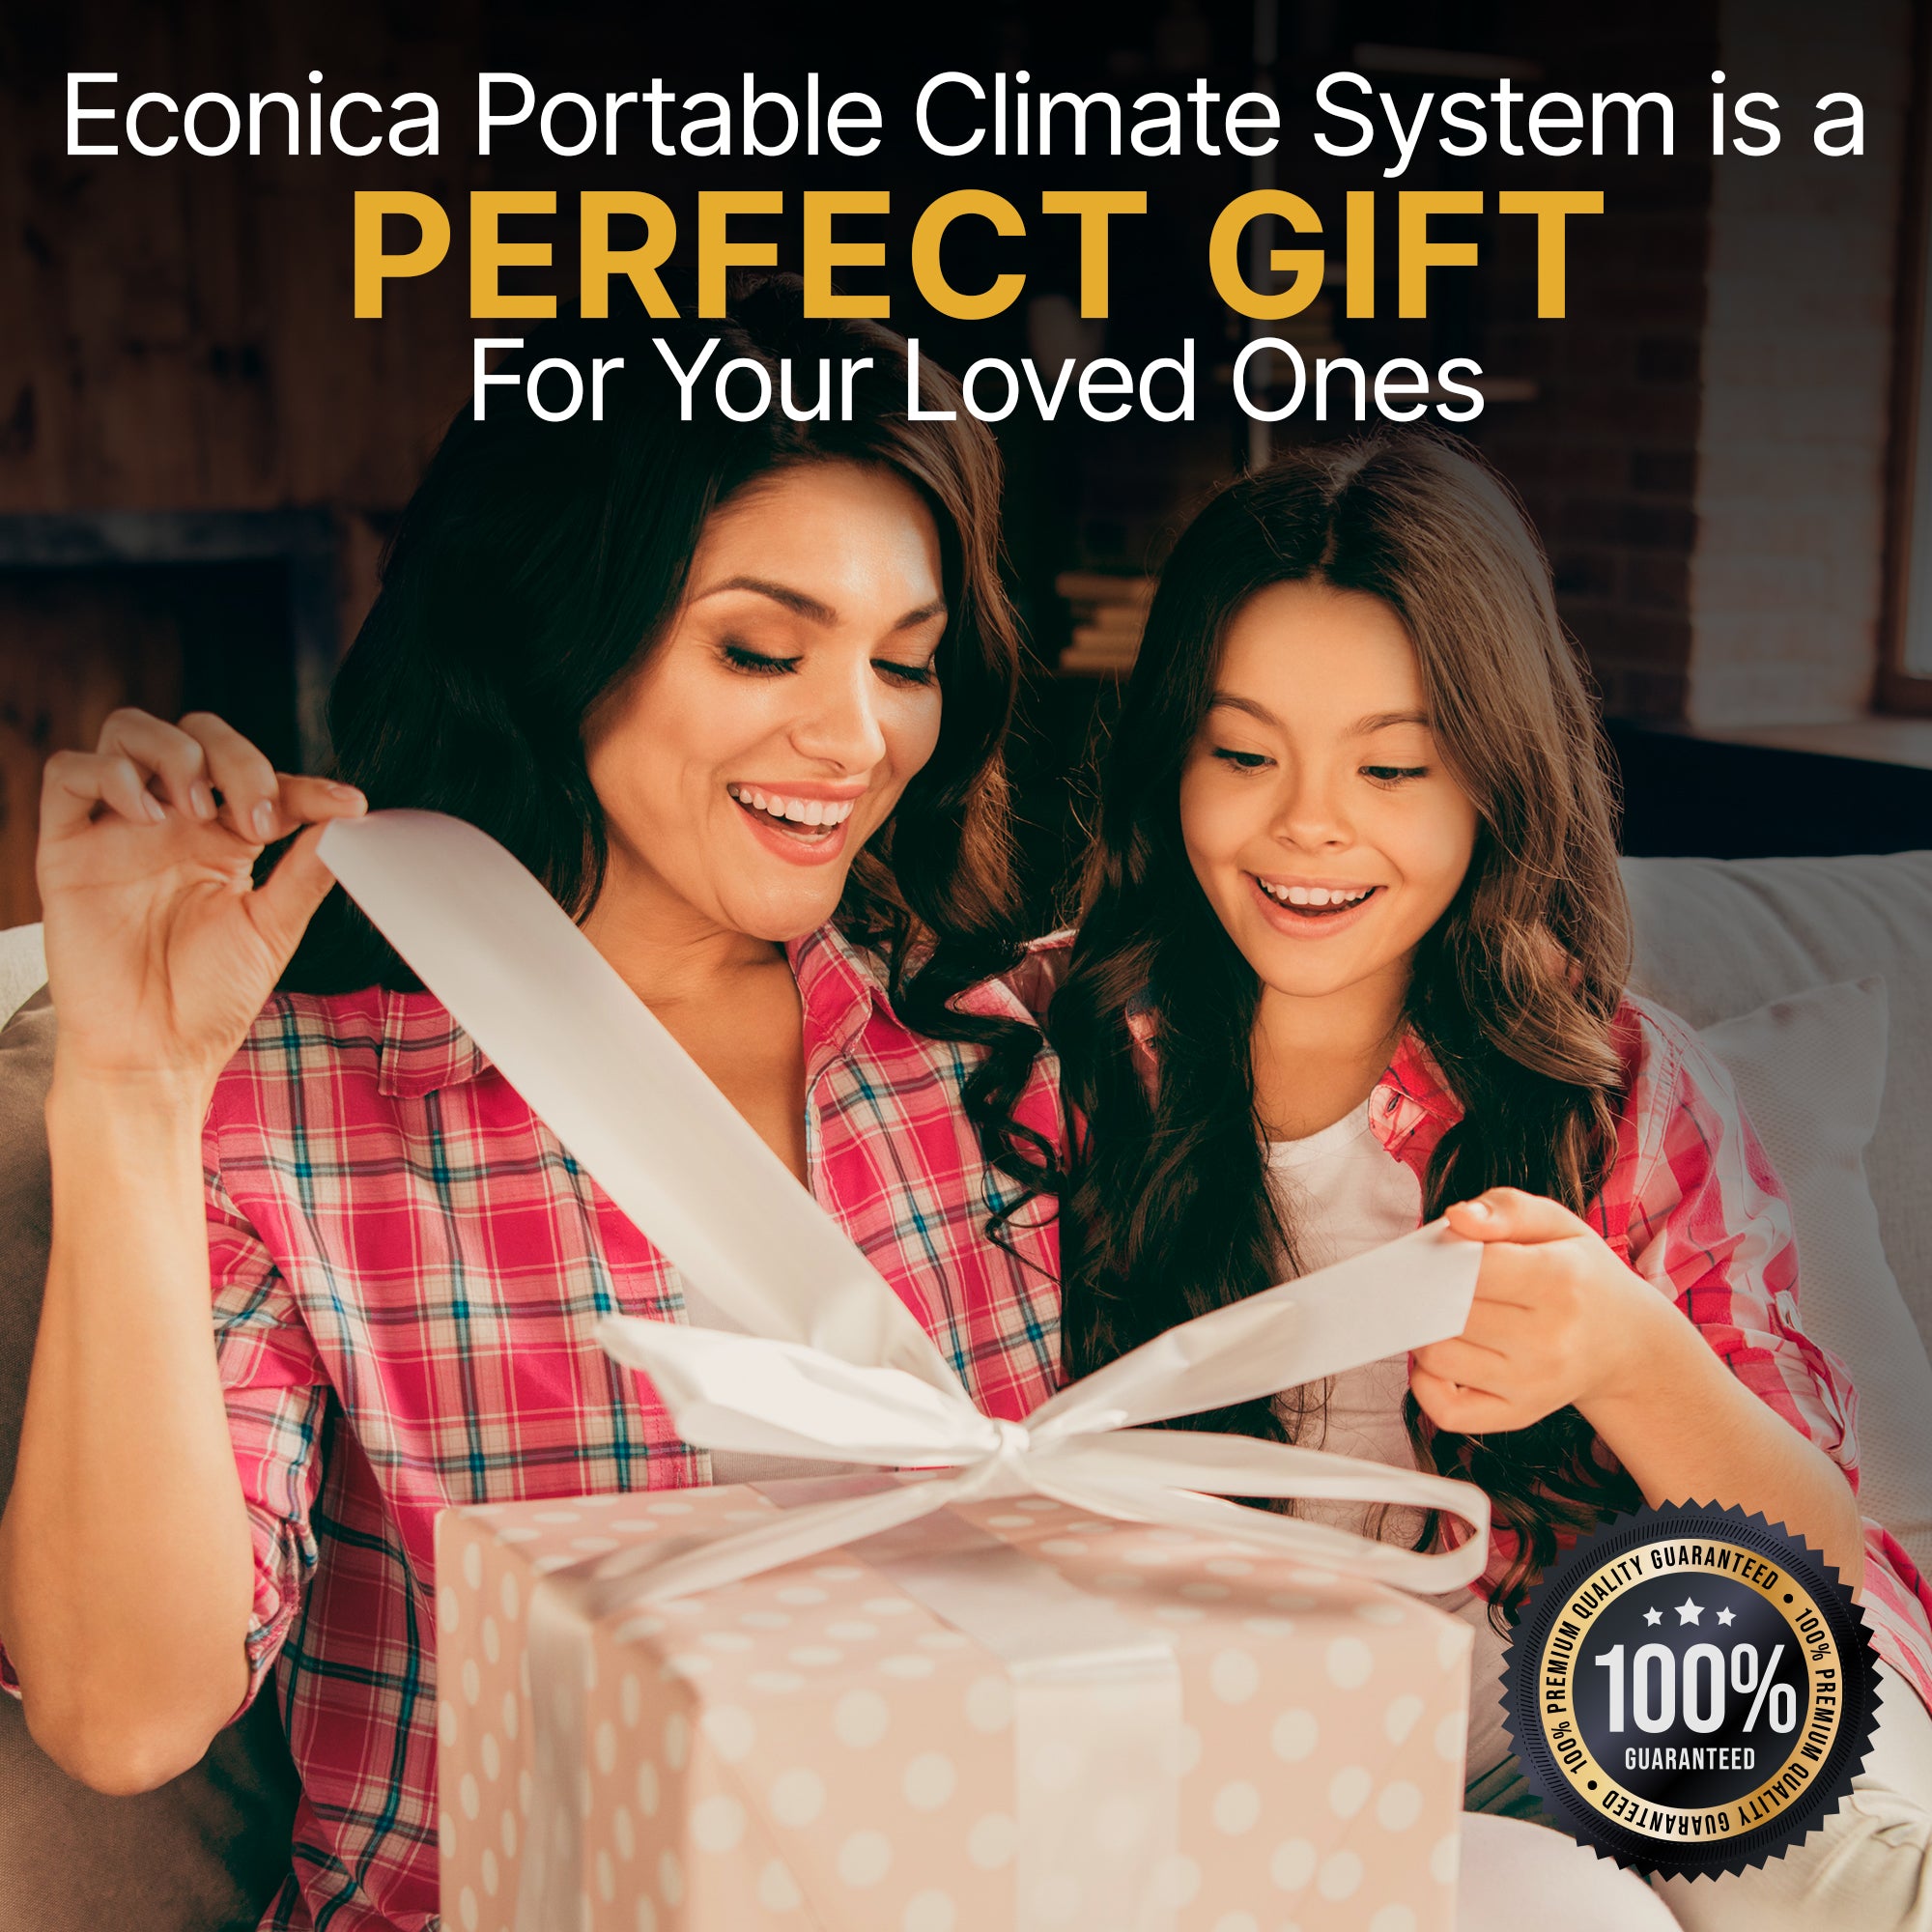 Premium Econika Climate System 4-in-1: air-purifier, humidifier, ionizer and UV-lamp